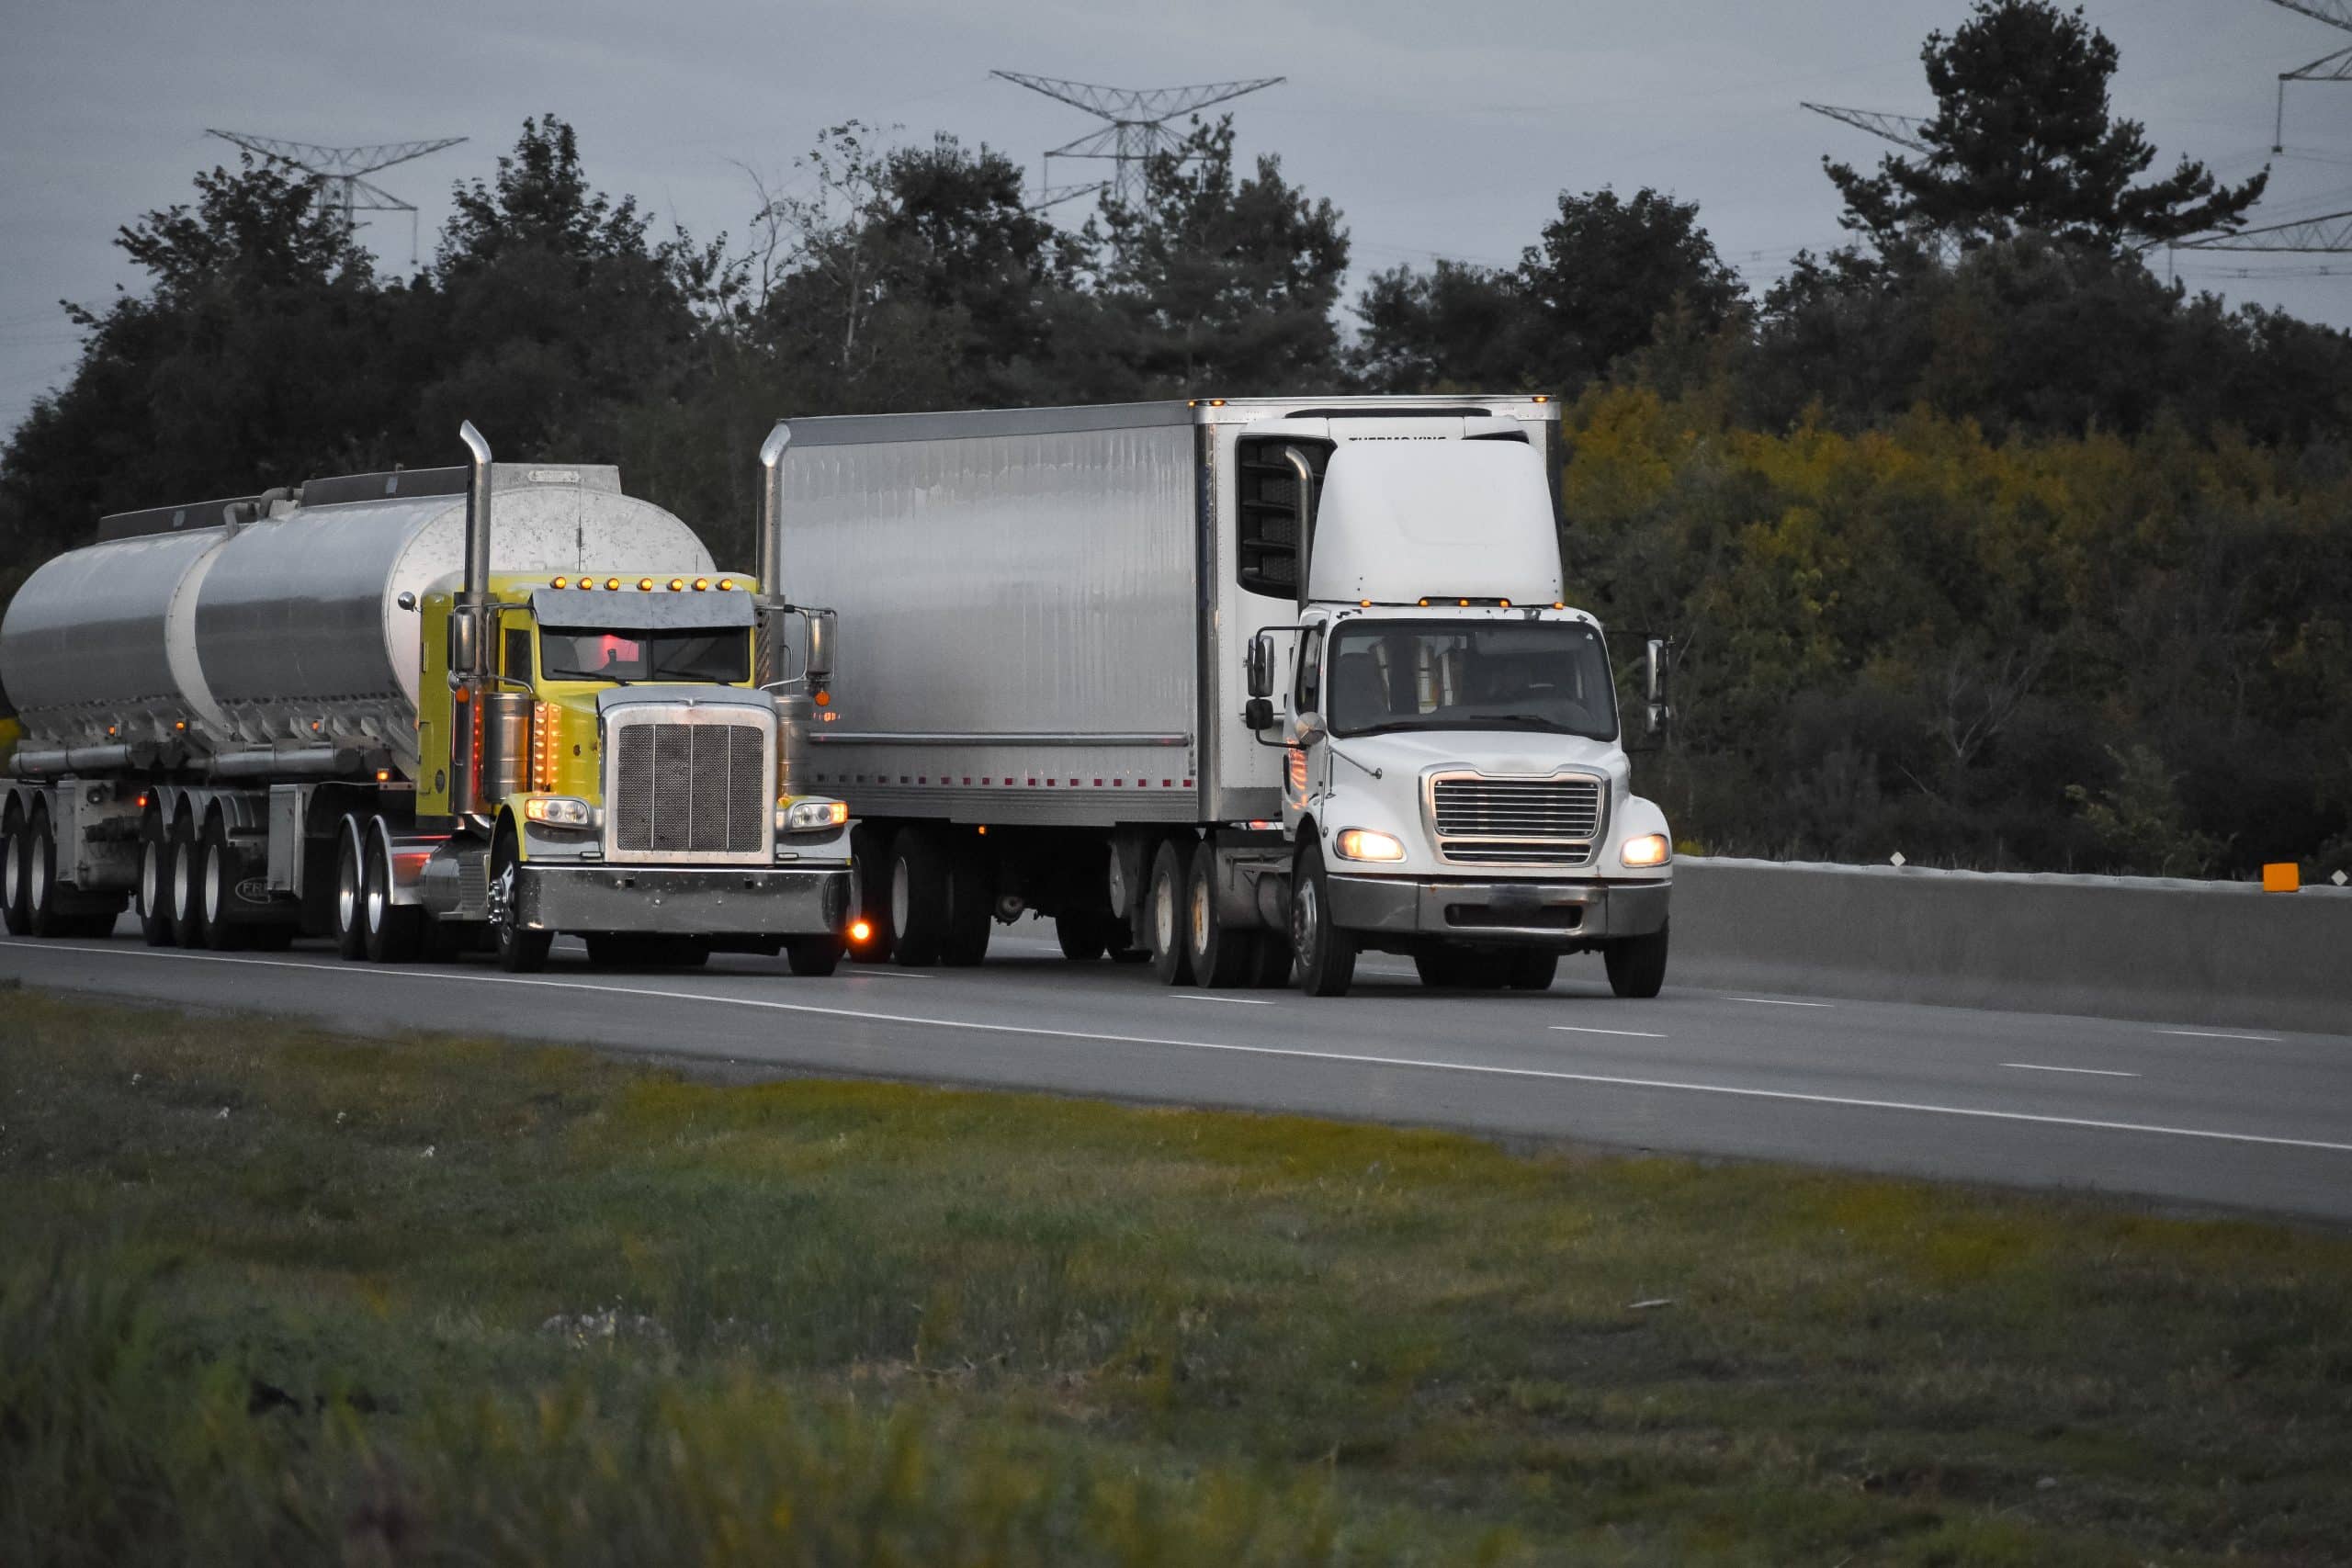 Two large trucks, one with a tanker trailer and another with a dry van, are driving side by side on a highway.